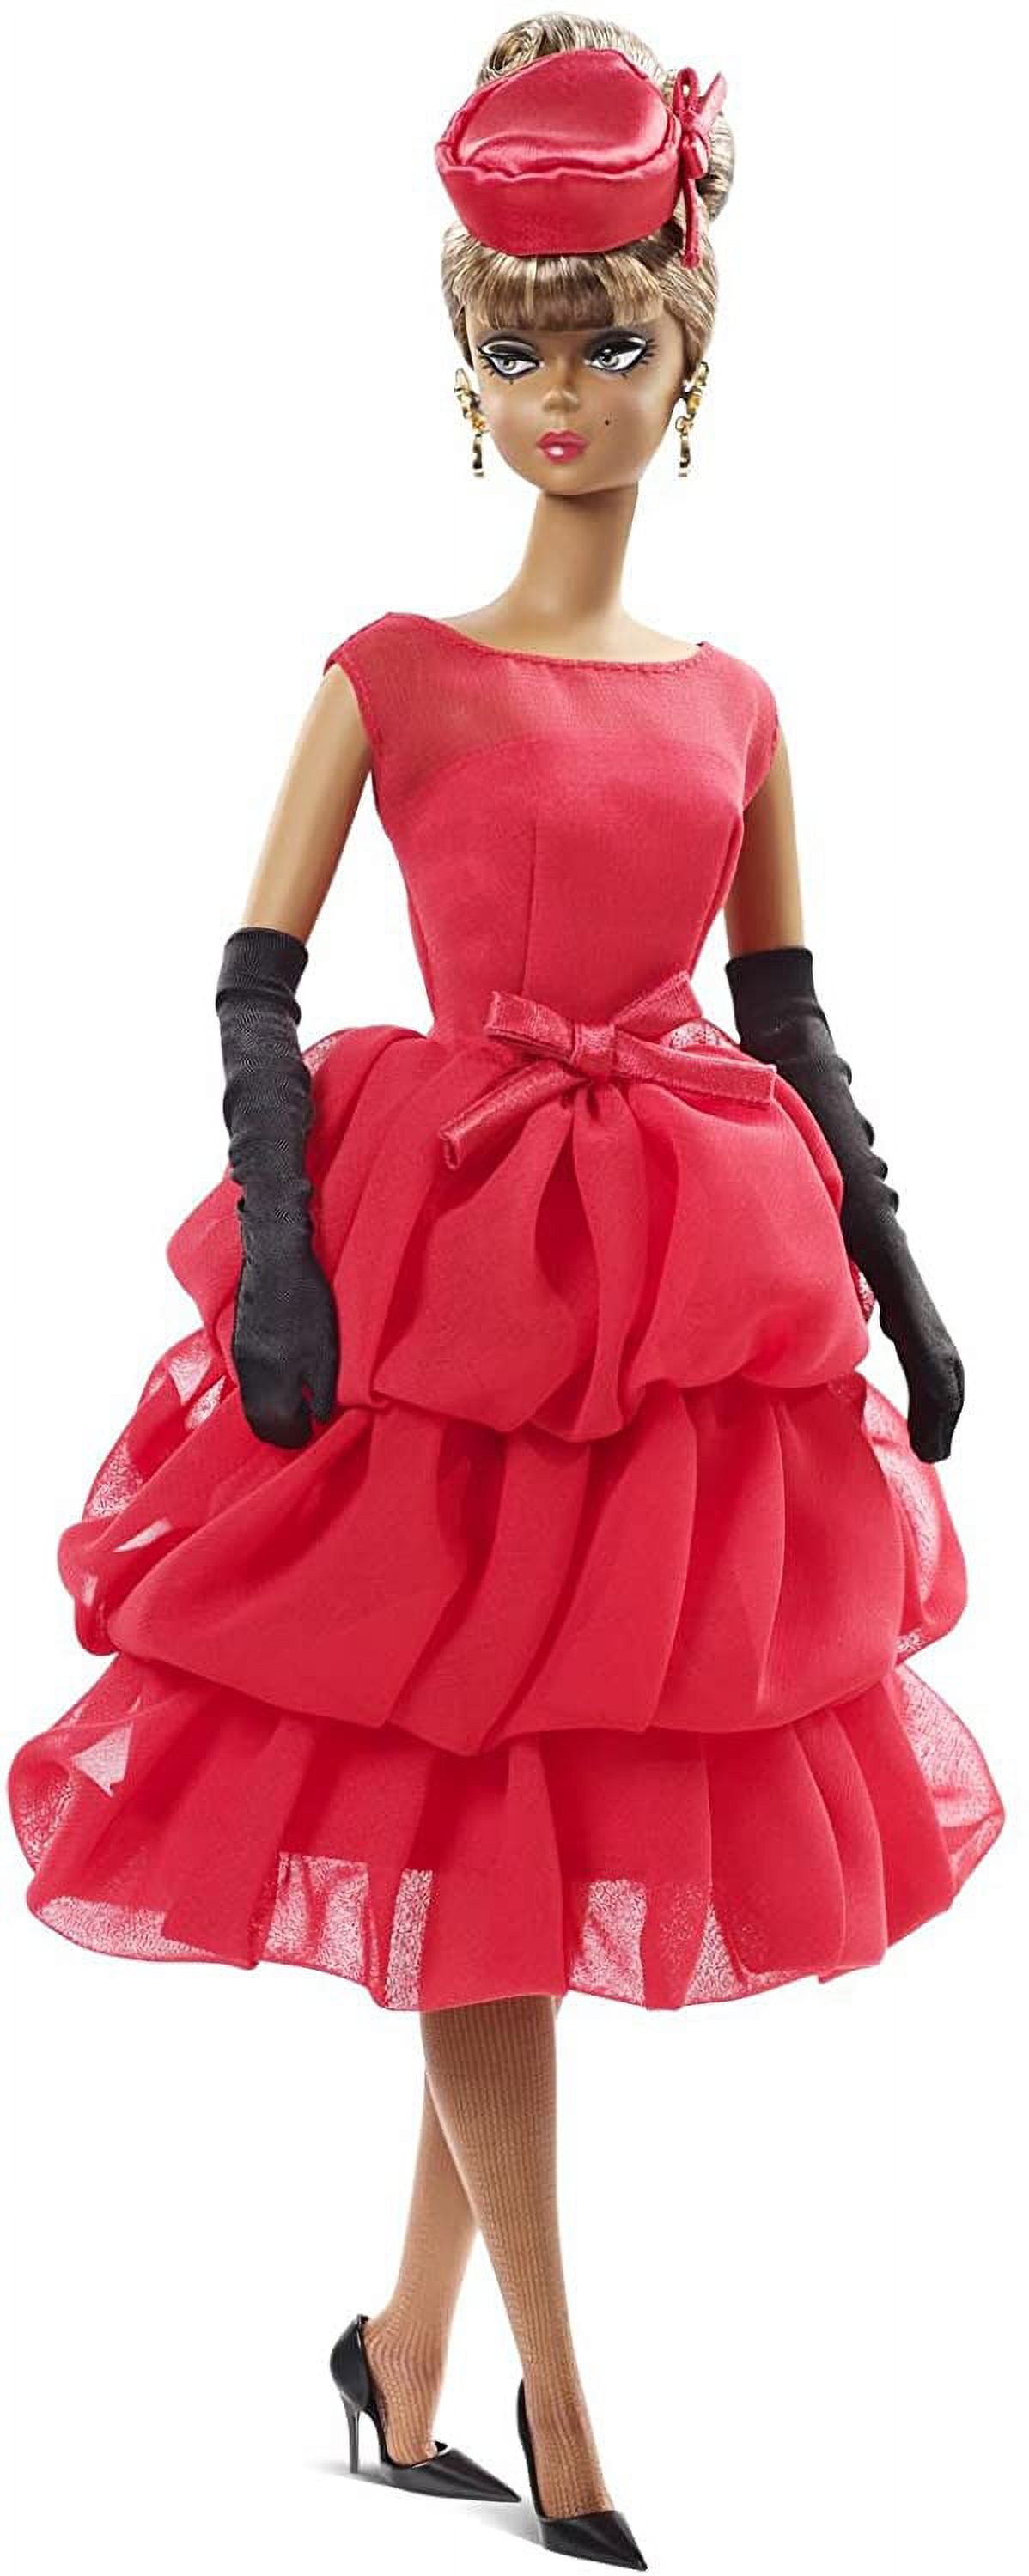 Barbie Trend Fashion Avenue Fever Classic Red Party Dress Doll